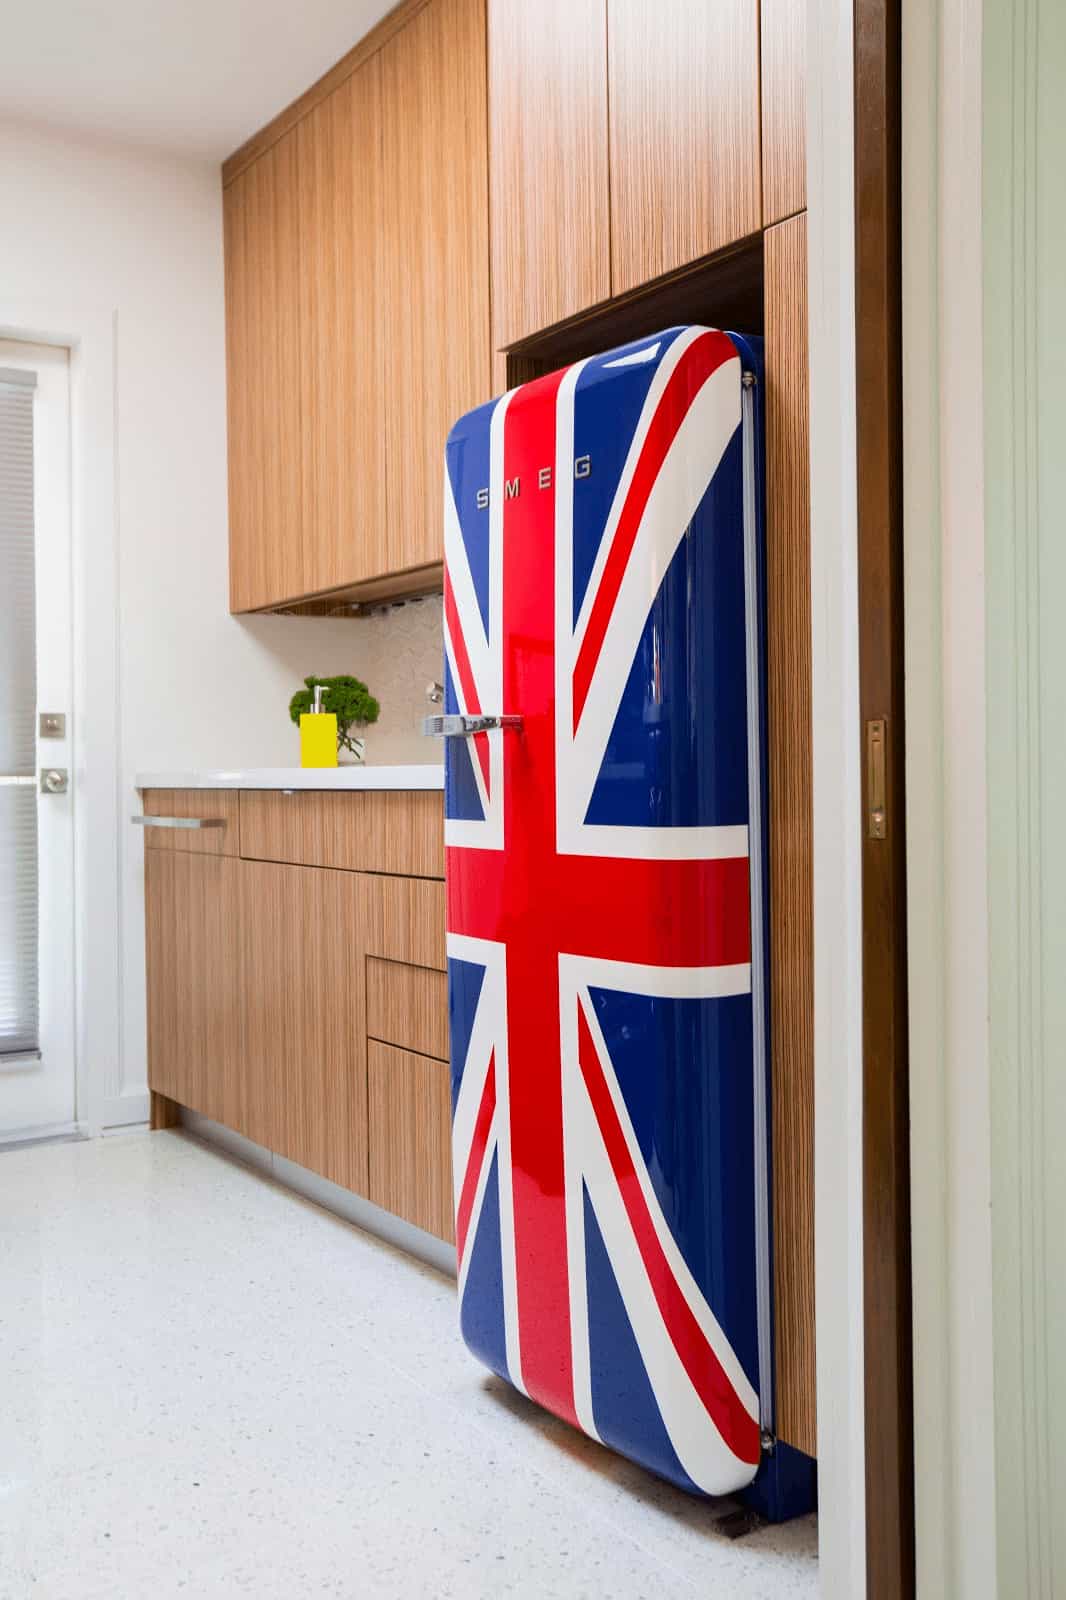 This Union Jack flag refrigerator from S M E G was the perfect piece for the kitchen!